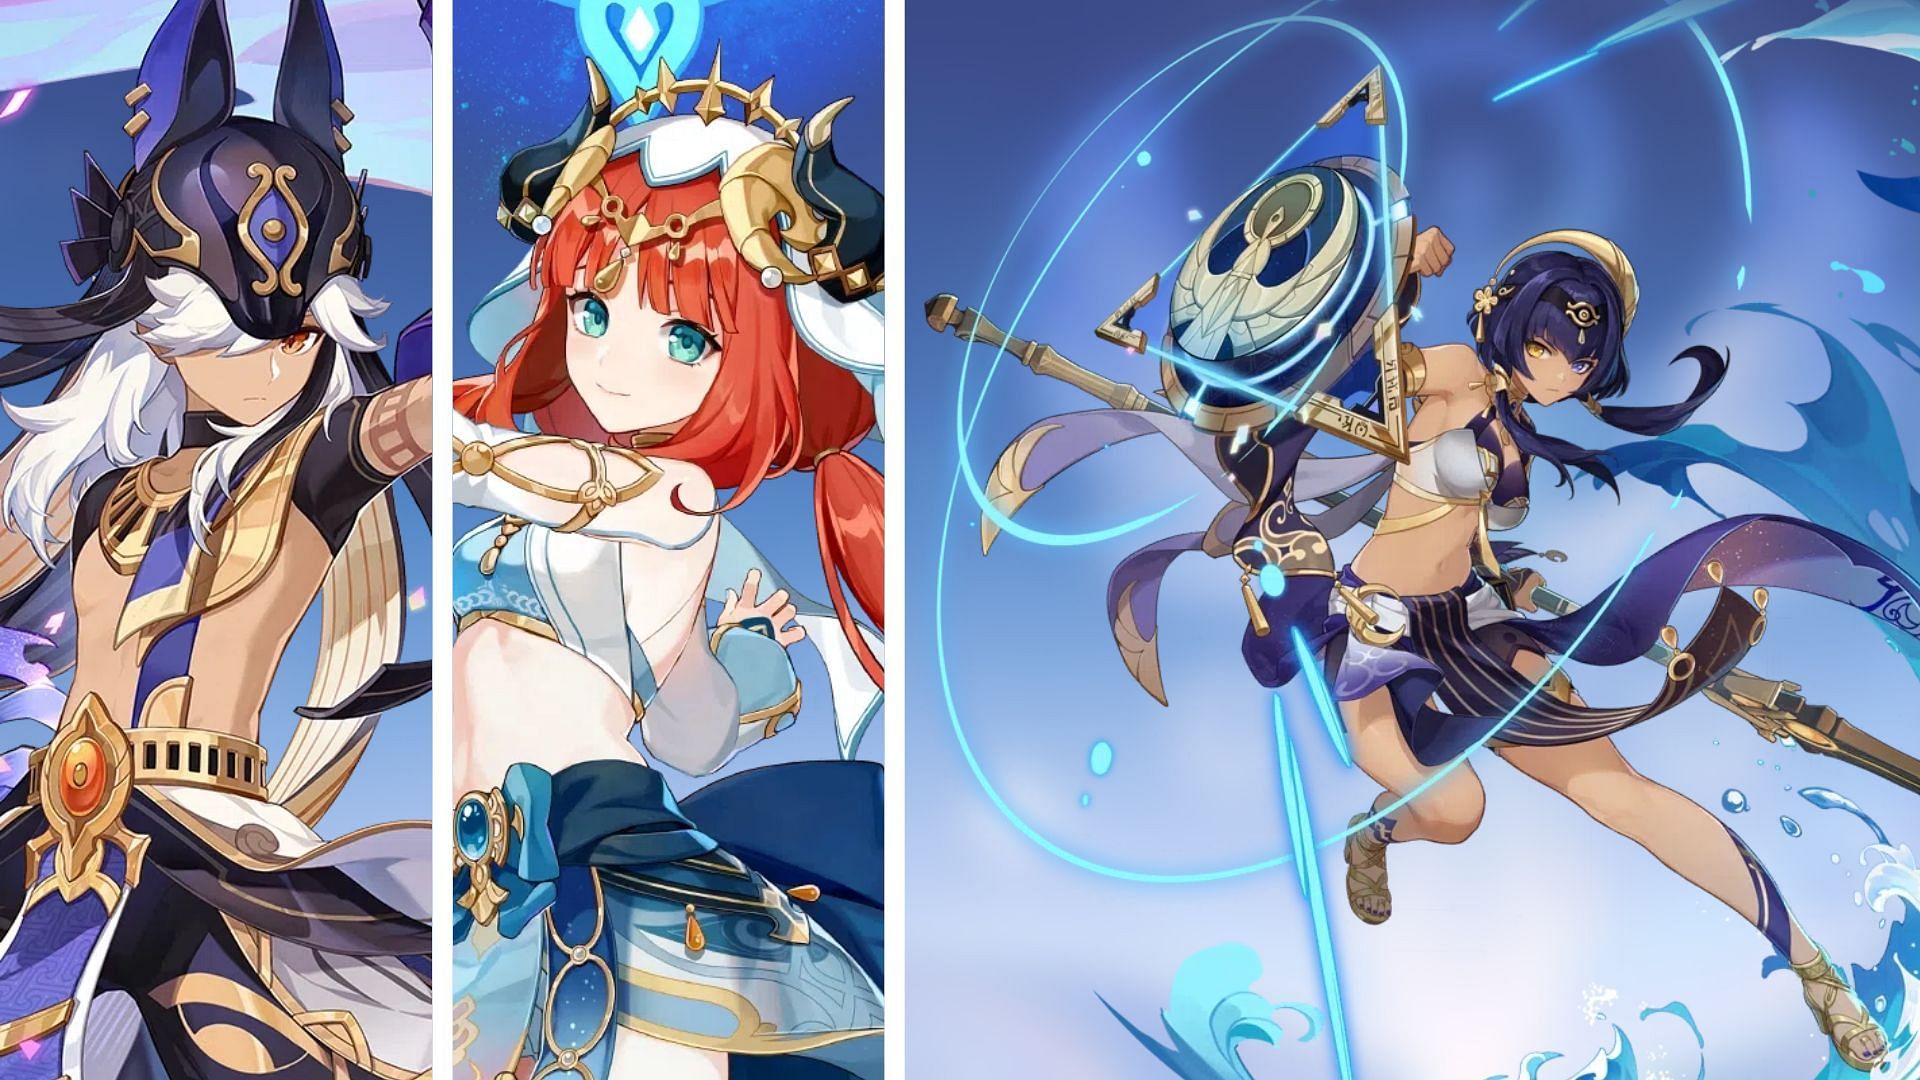 Genshin Impact version 3.1: Cyno, Nilou, and Candace on banners